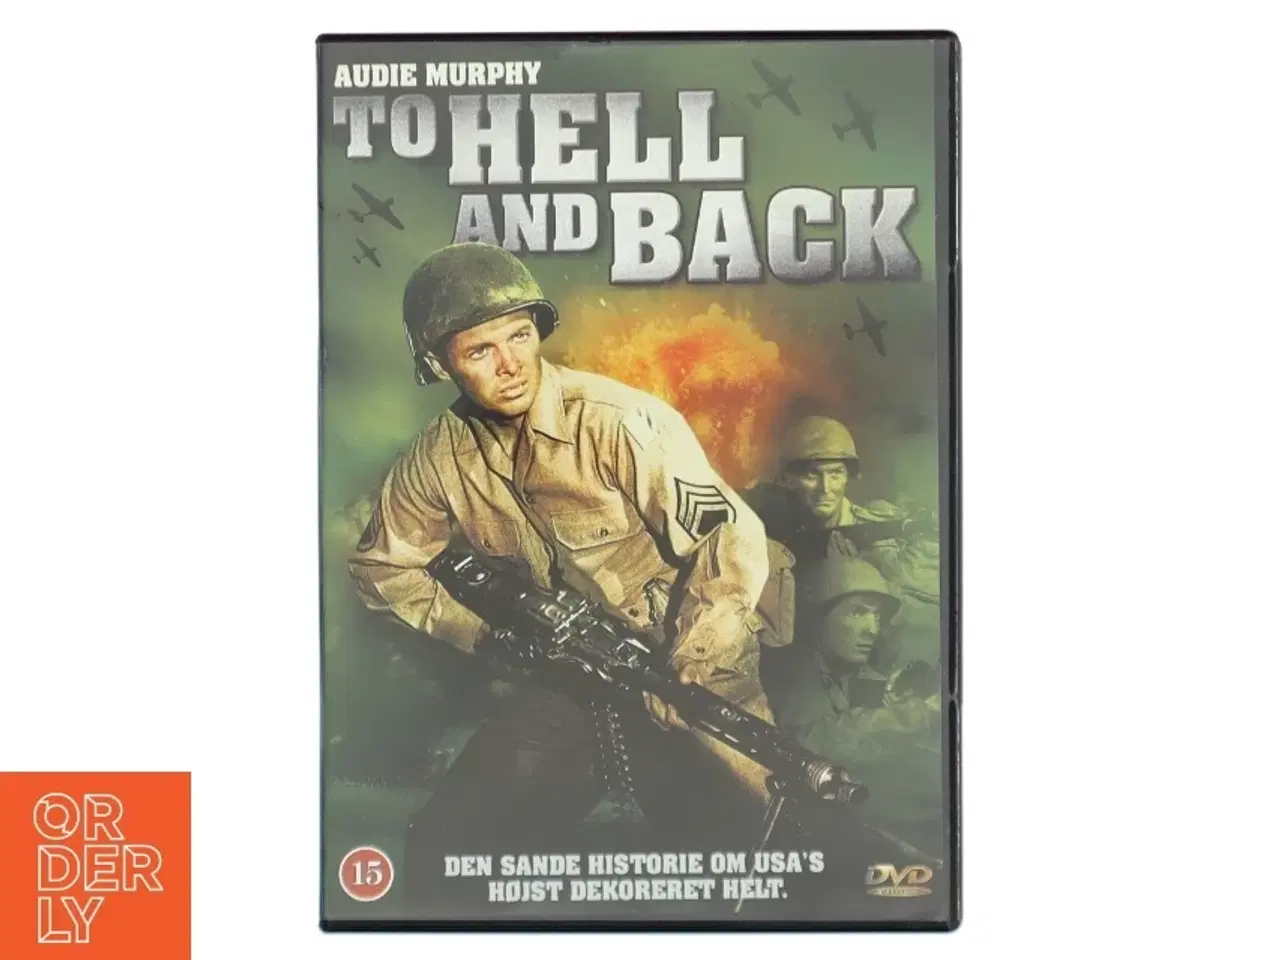 Billede 1 - DVD - To Hell and Back